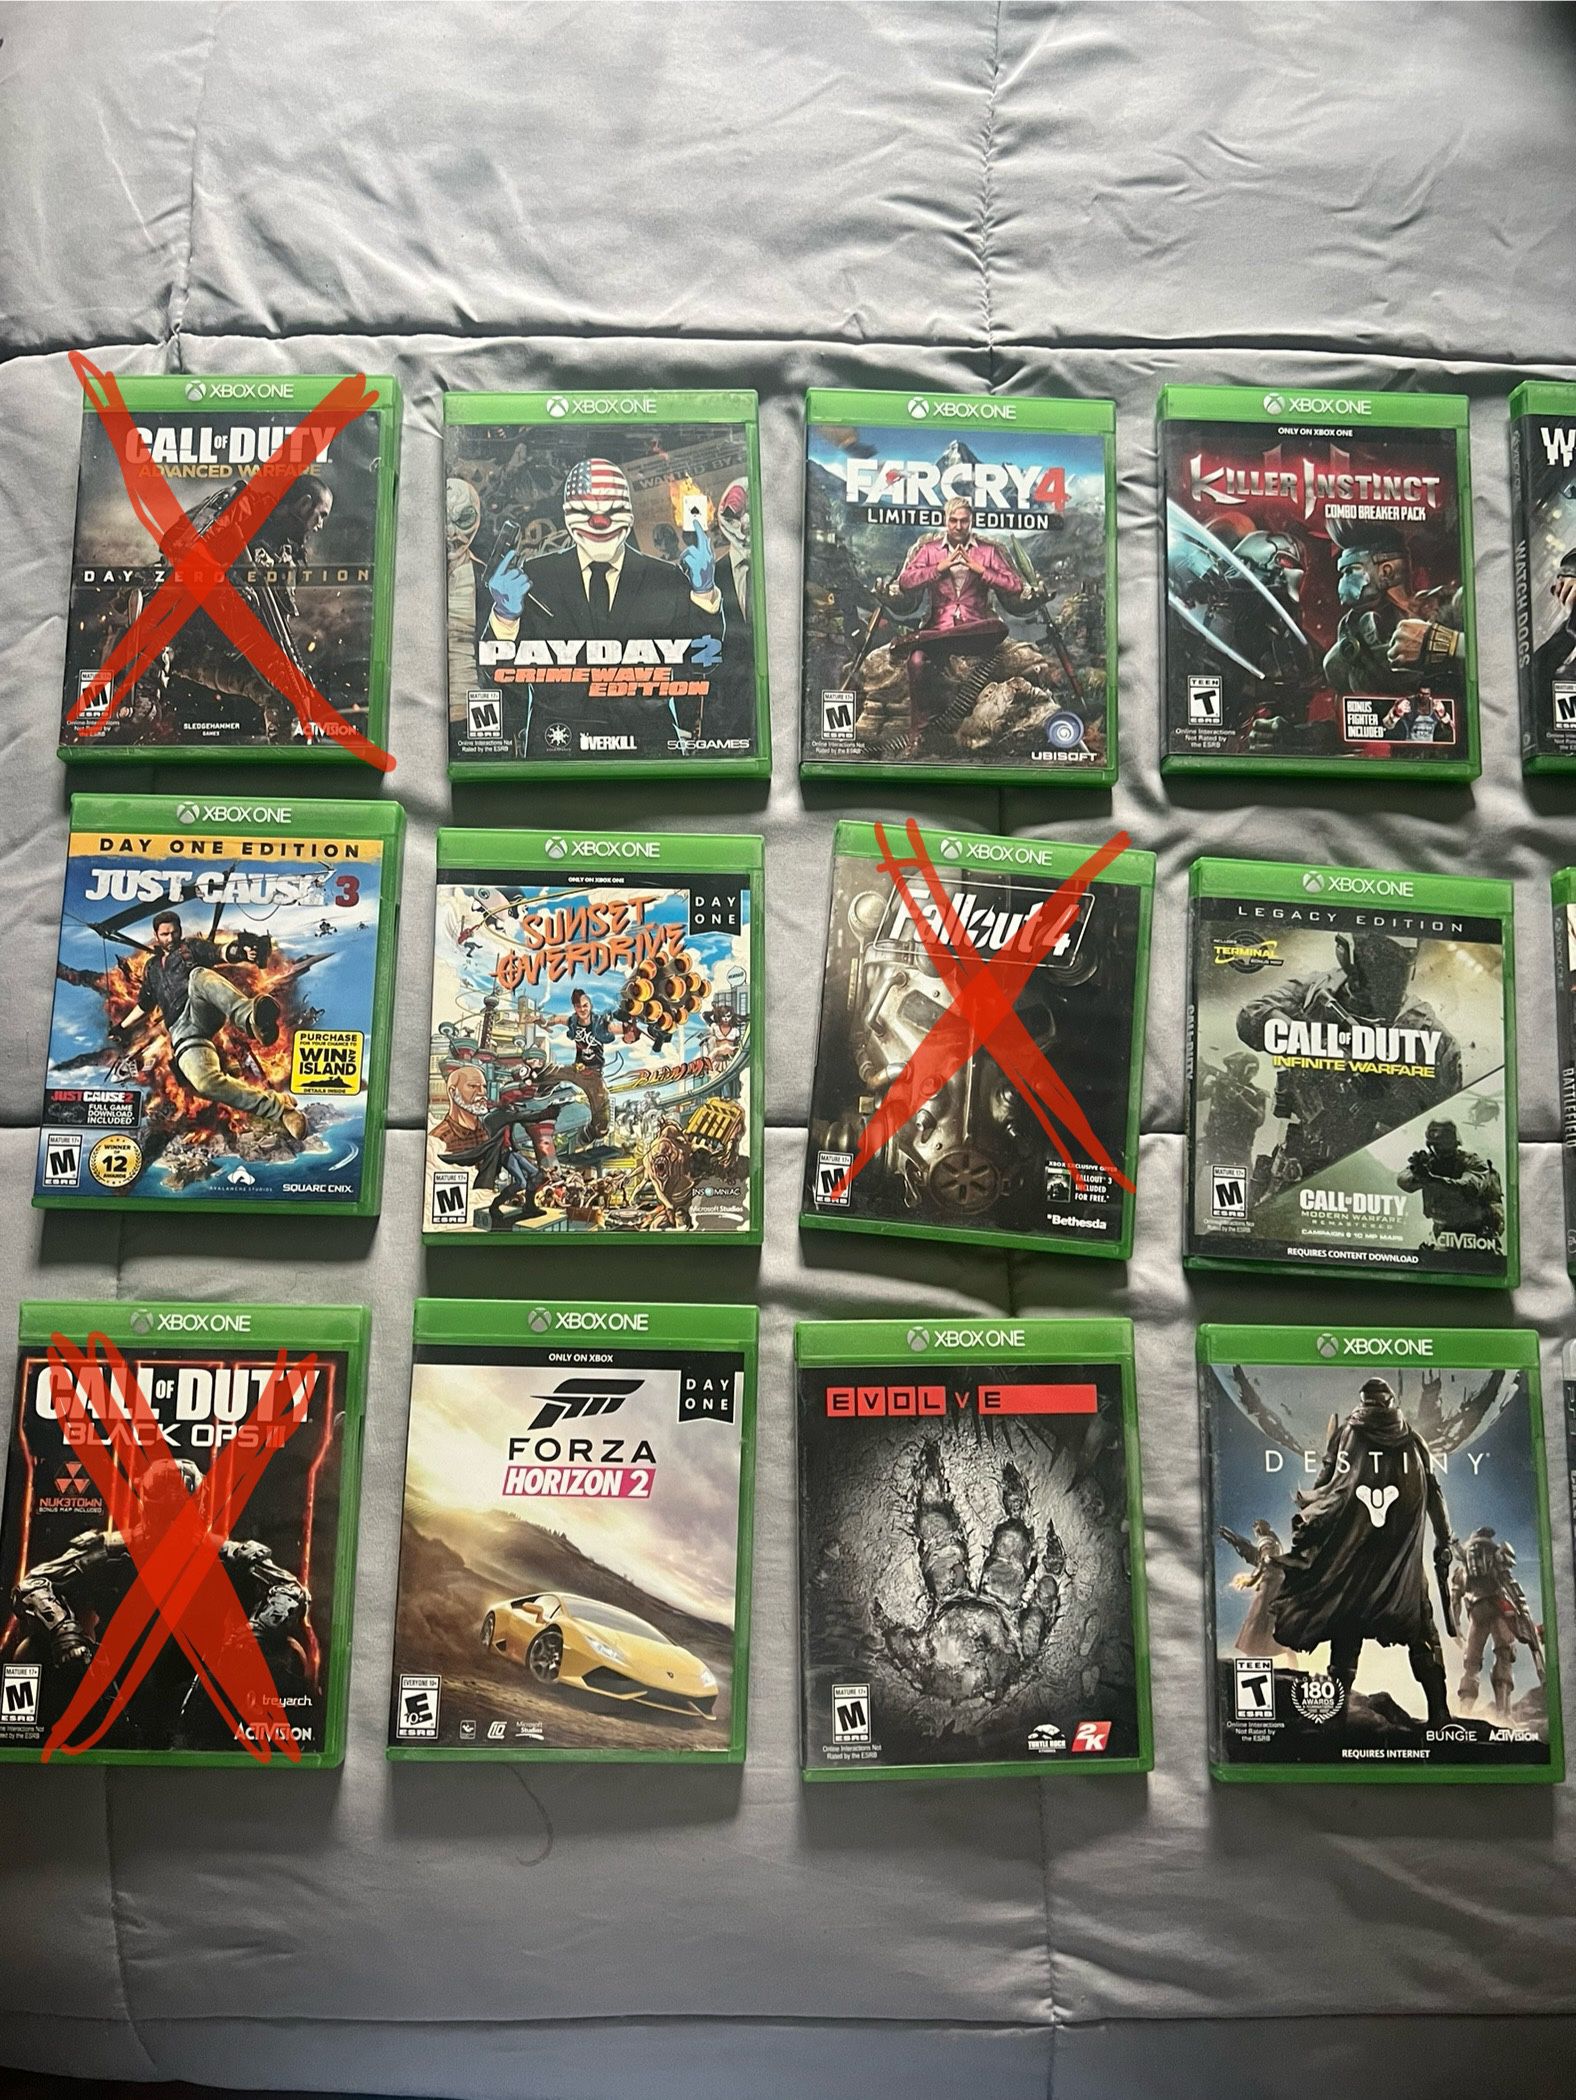 XBOX ONE / PS3 Games (WHOLE LOT $25). PICK UP. 